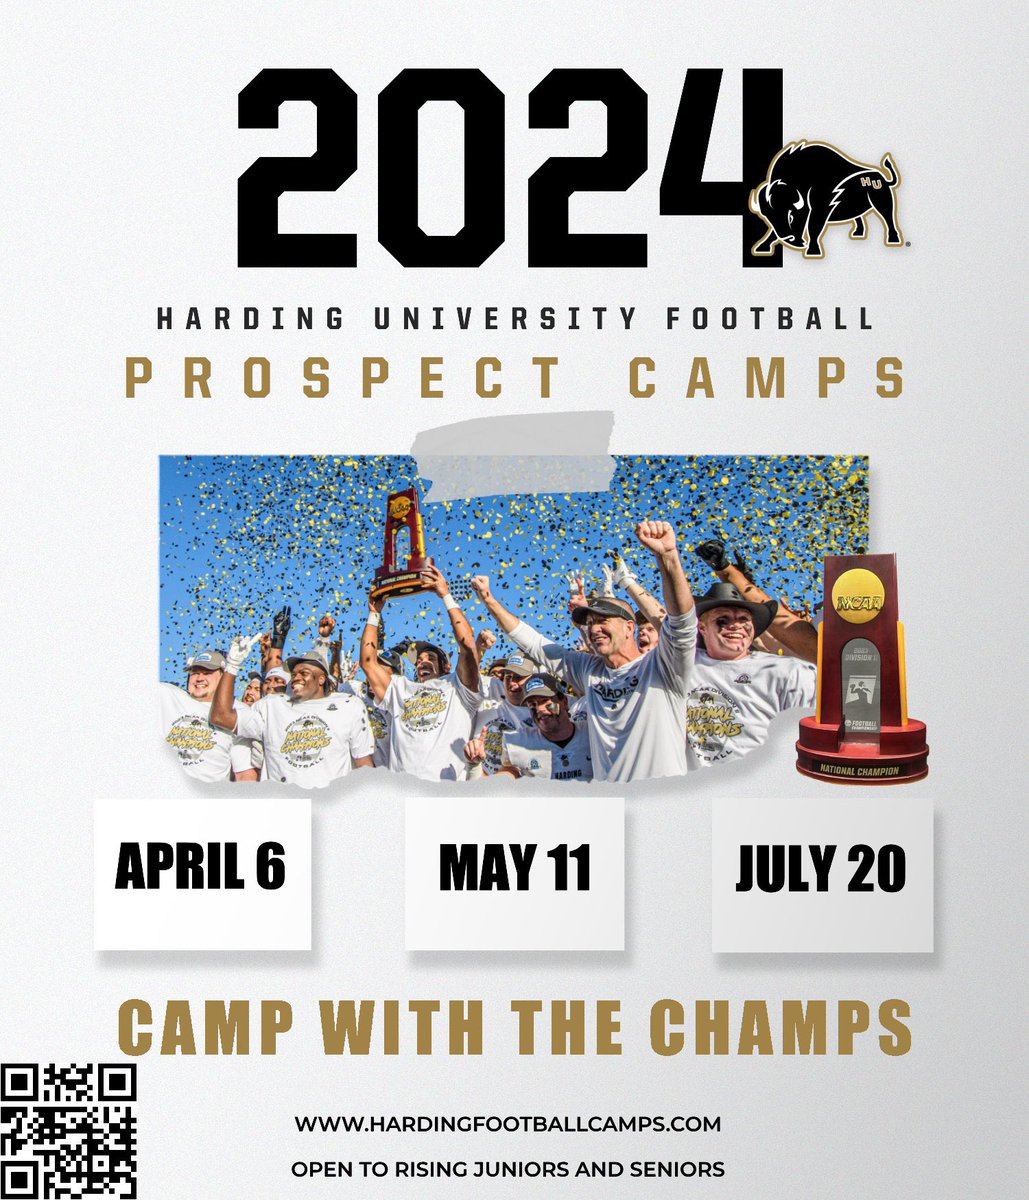 We are just 2 weeks away from our first prospect camp of 2024! Sign up online at hardingfootballcamps.com and come camp with the champs April 6th! #HonorGod #HUCodeBlack